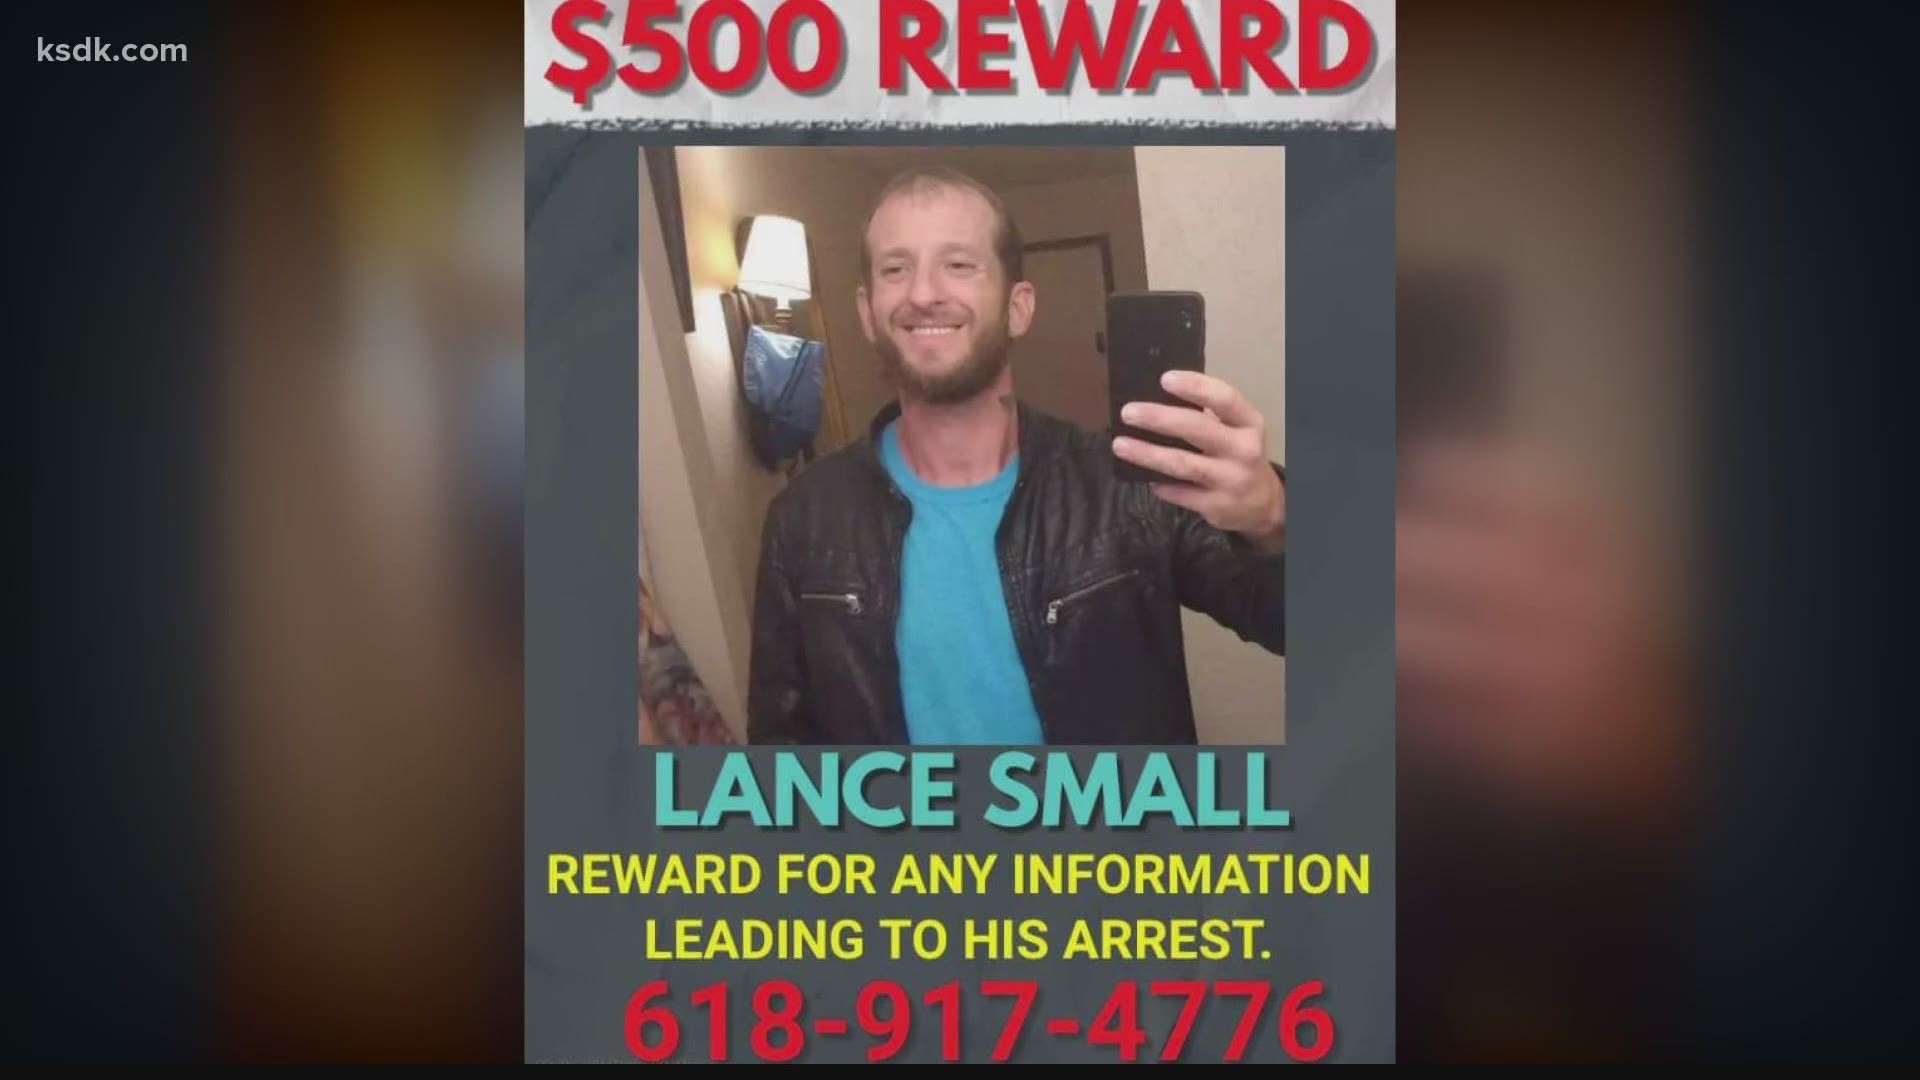 Lance Small was charged with aggravated cruelty to animals but has not been taken into custody